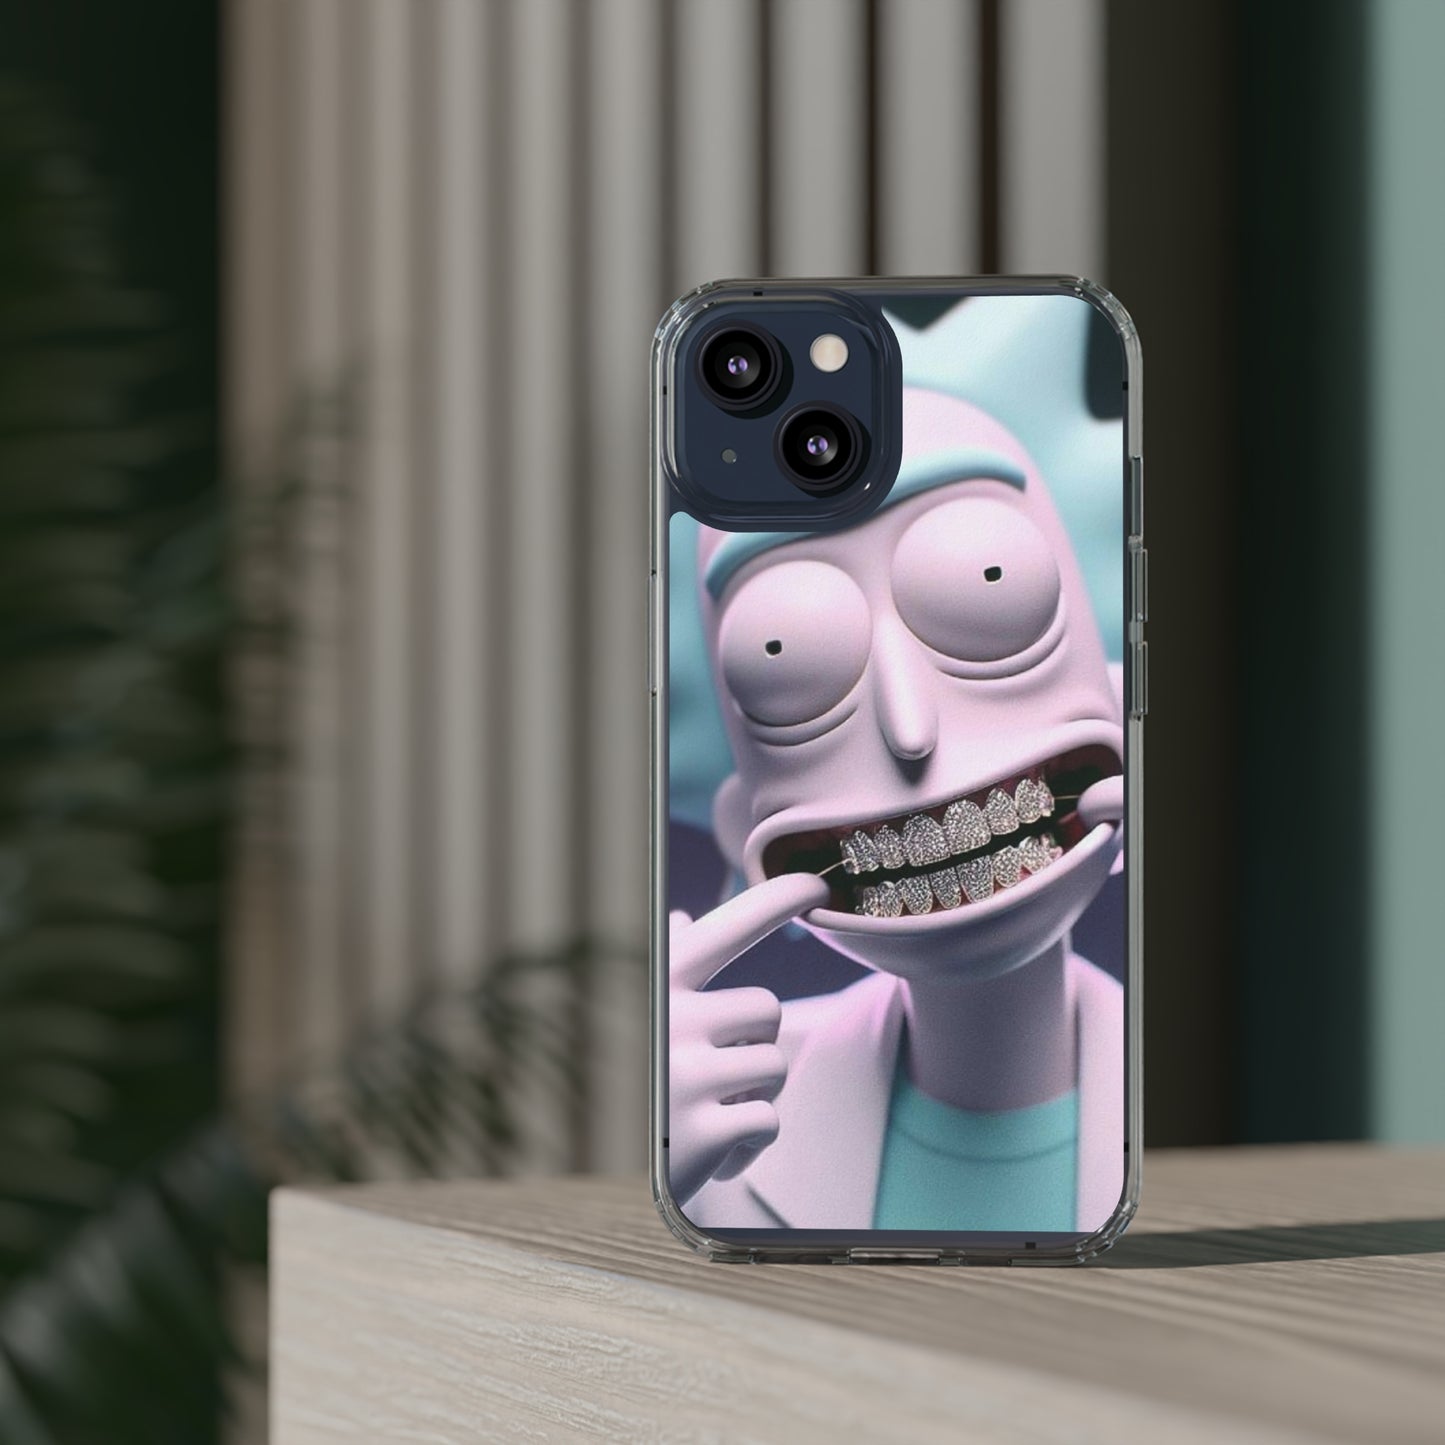 Clear CasesRickMorty